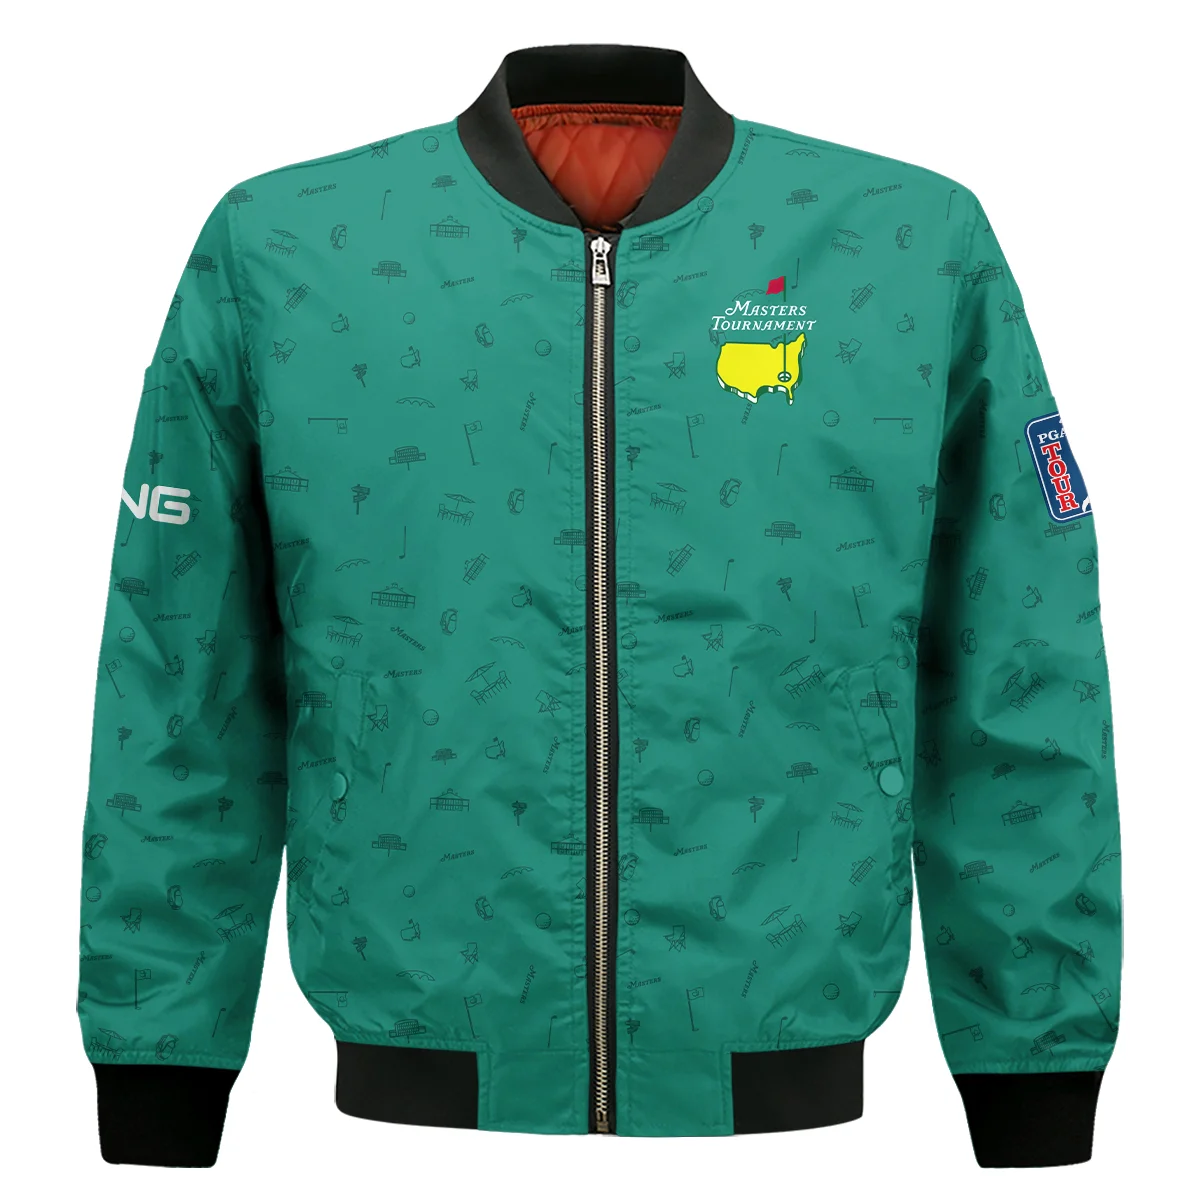 Golf Masters Tournament Ping Bomber Jacket Augusta Icons Pattern Green Golf Sports Bomber Jacket GBJ1312